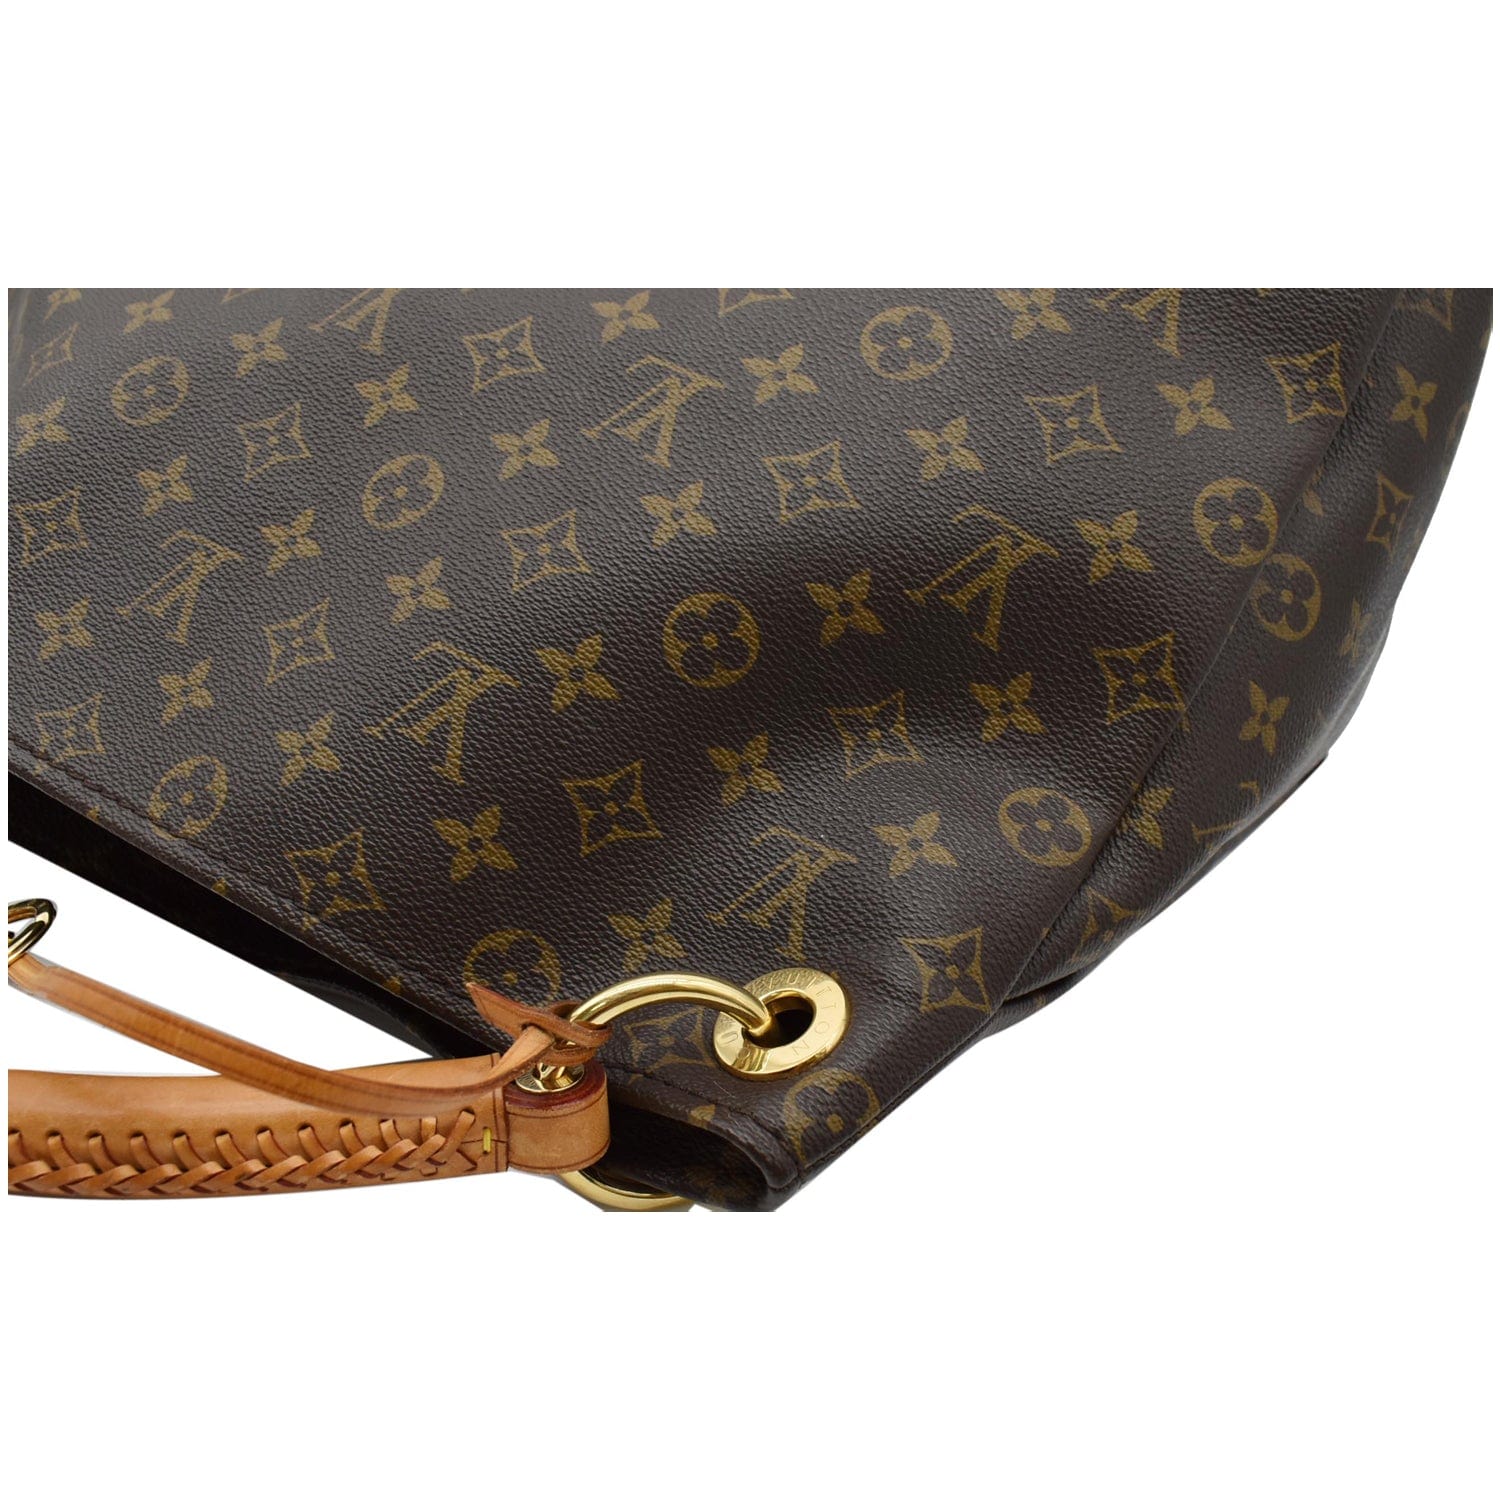 AUTHENTIC LOUIS VUITTON ARTSY MM leather brown hobo shoulder bag 2 way 